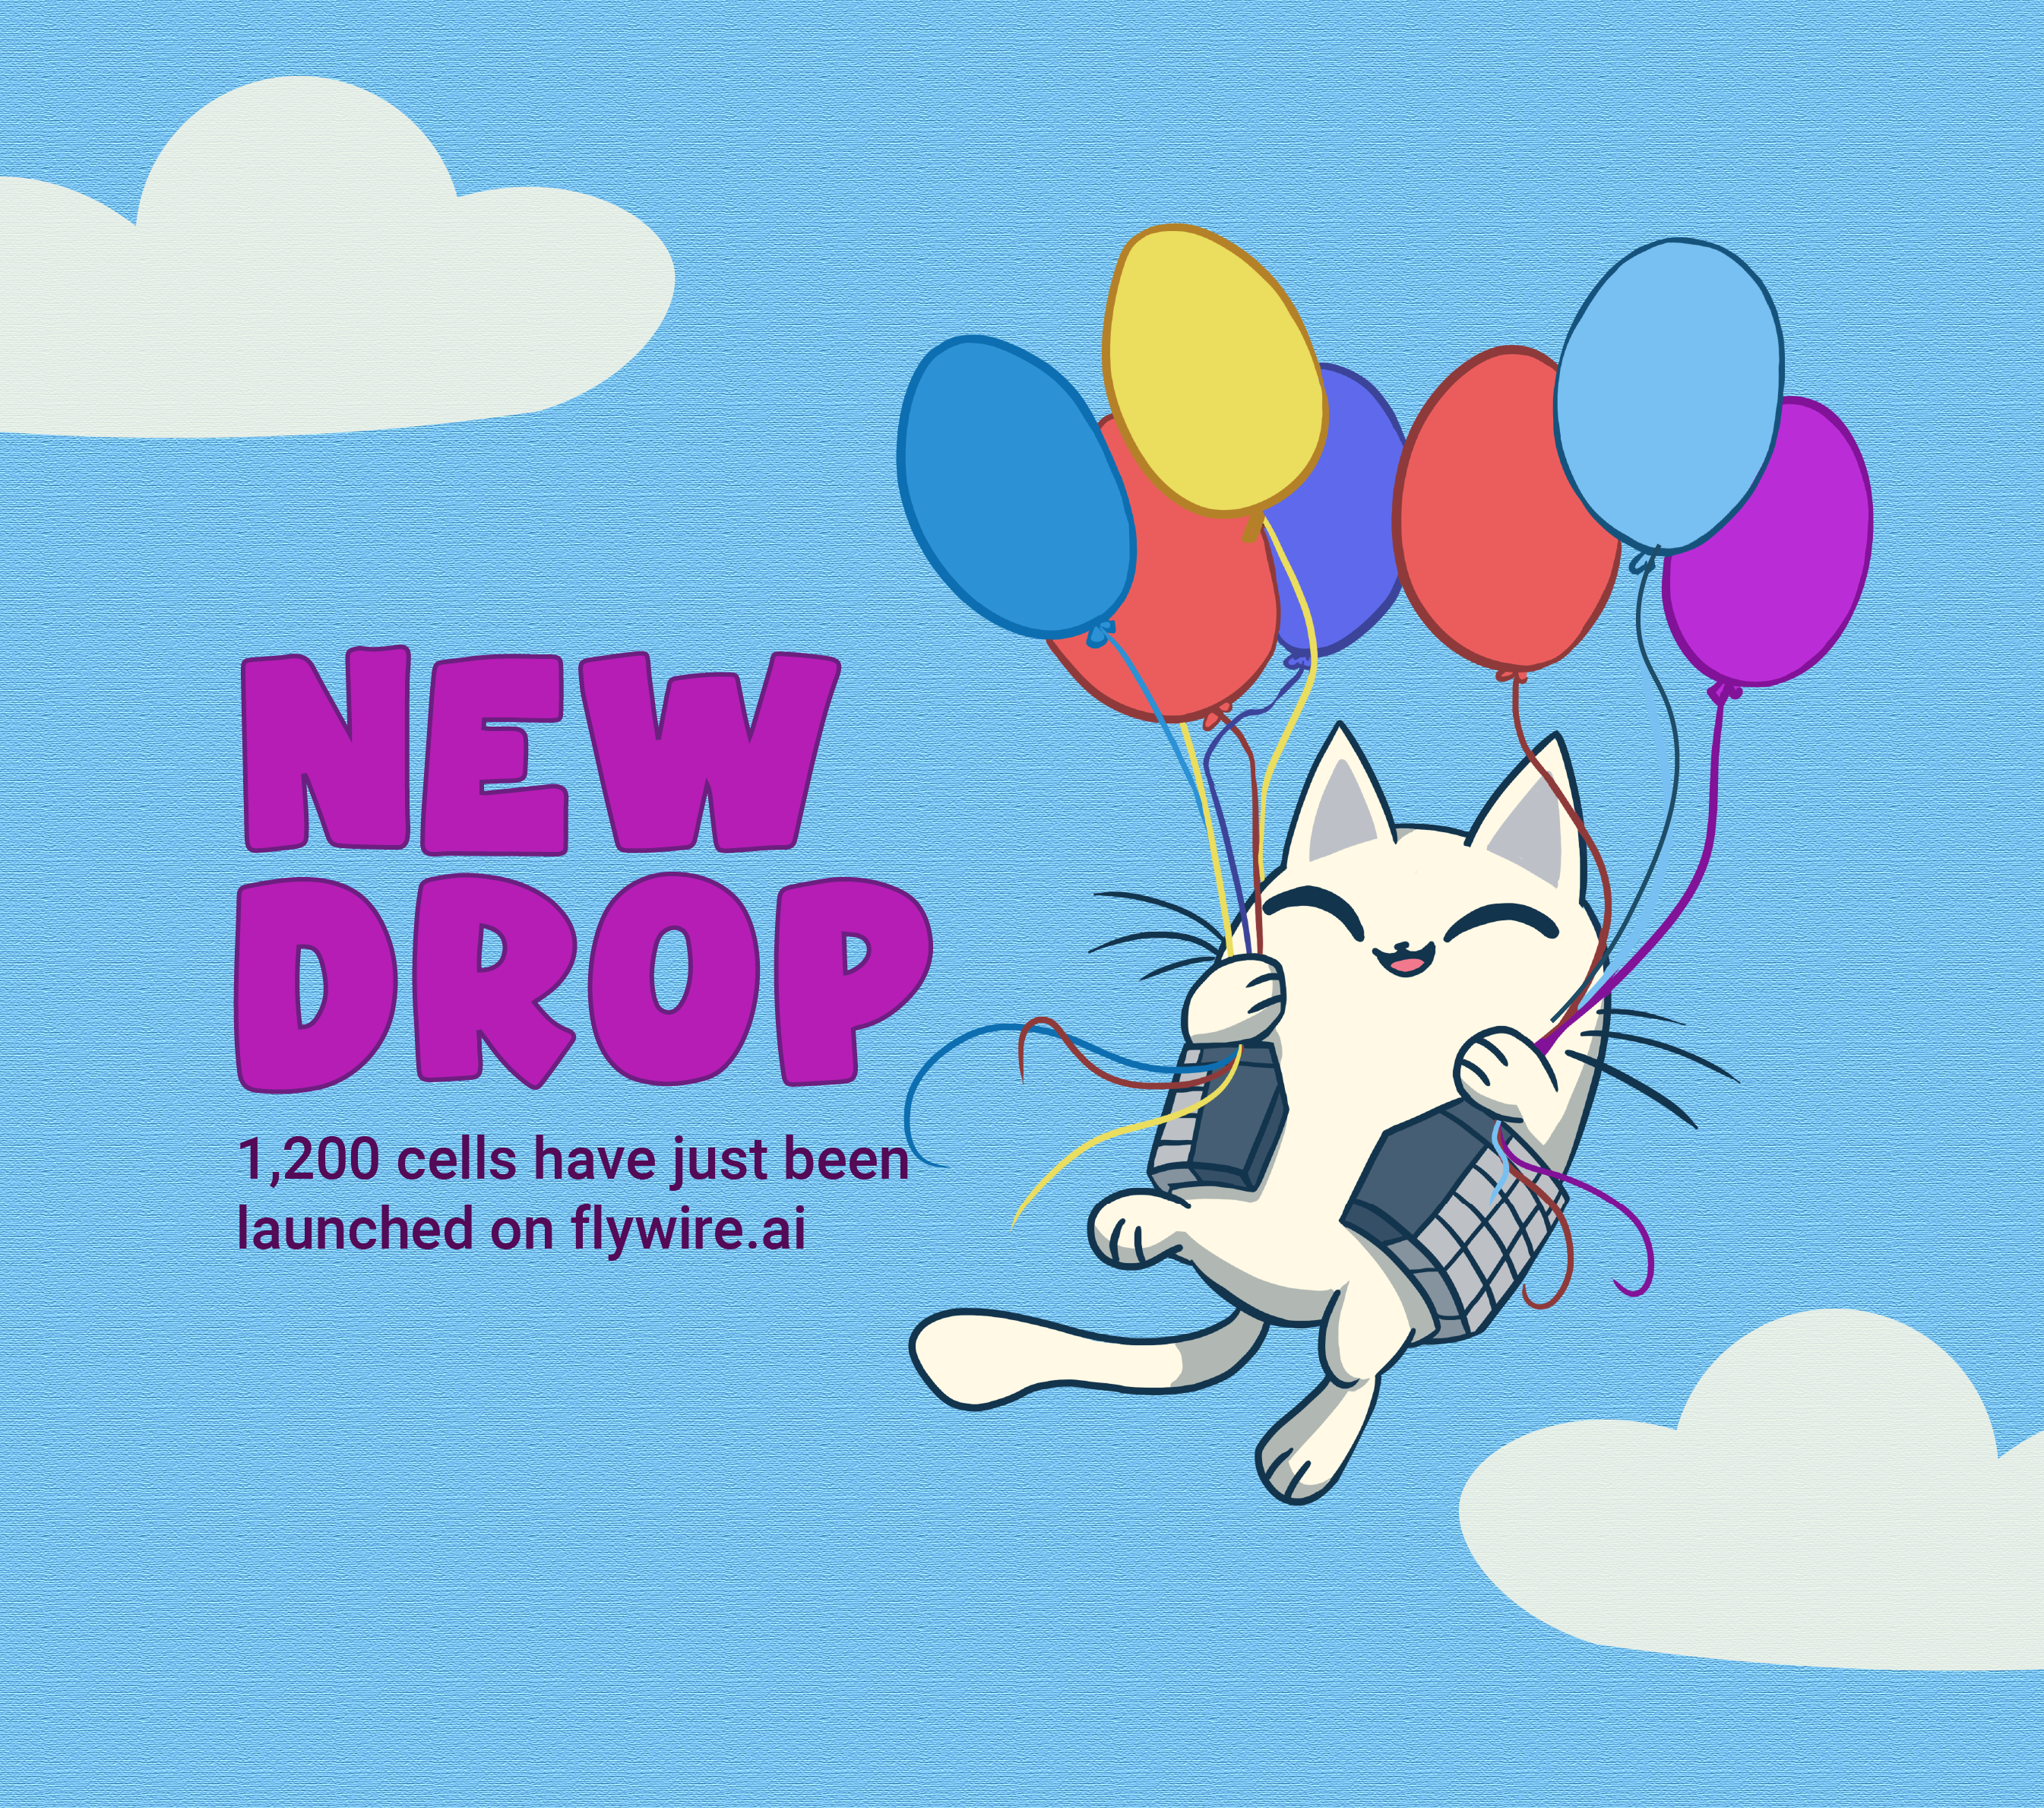 New Cell Drop!